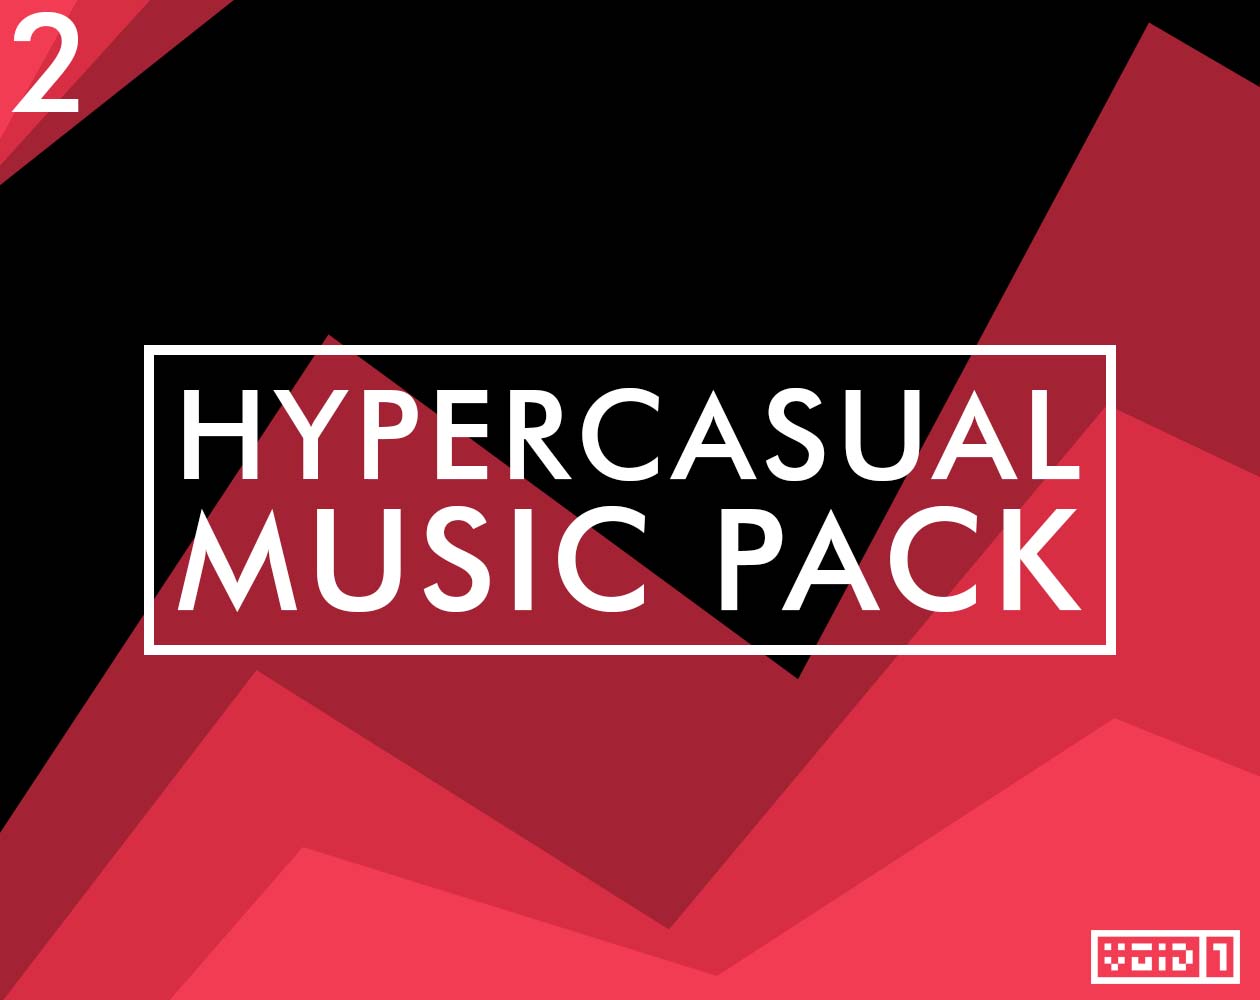 Hypercasual Music Pack 2 by VOiD1 Gaming